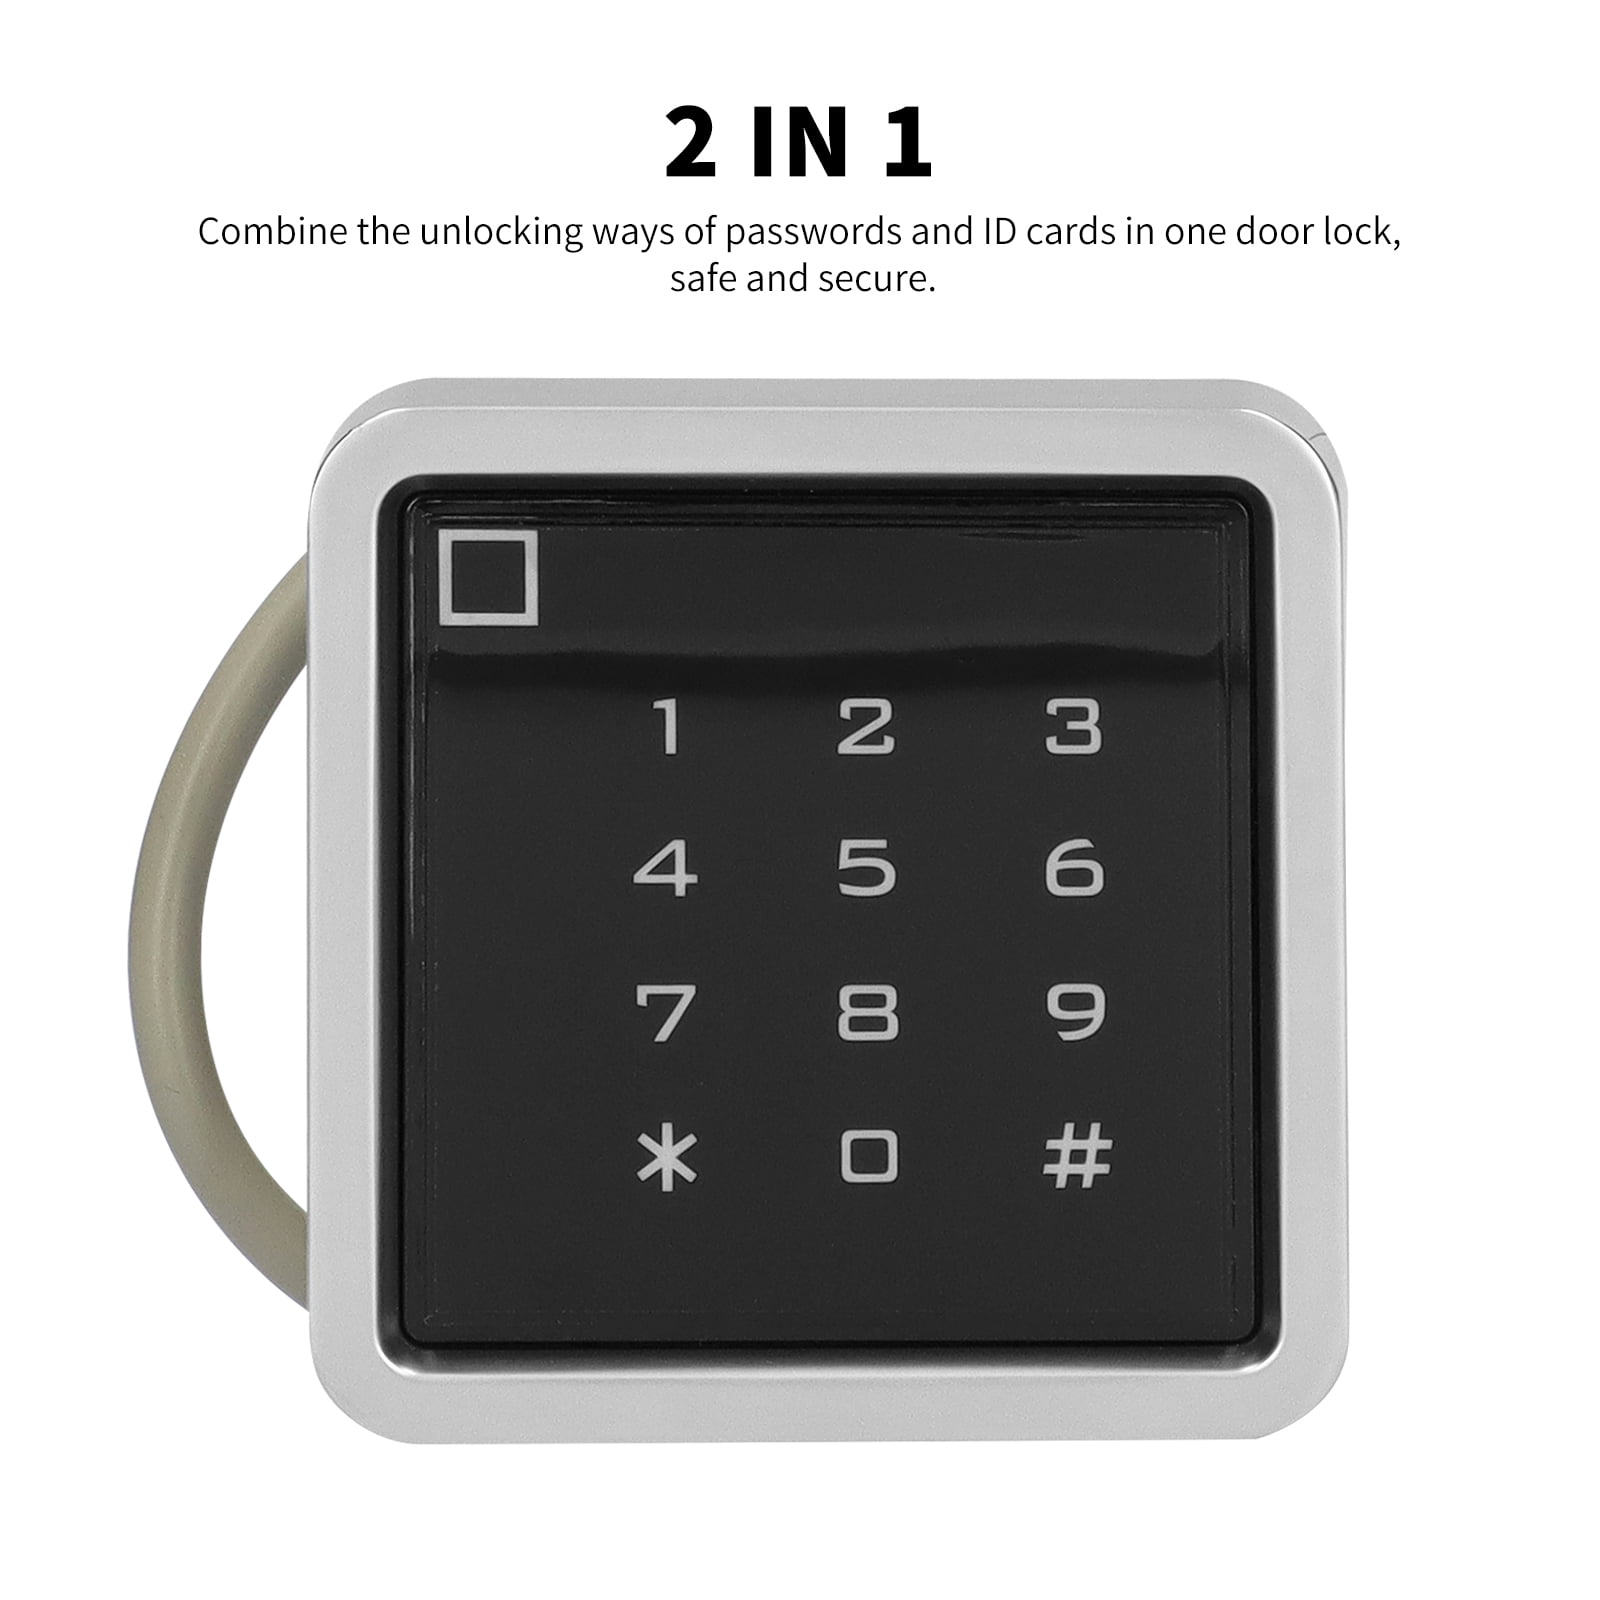 Ultra Mini Smart Reader Writer Waterproof ID Card Reader for Home Office Door Entry Access Control Security System 